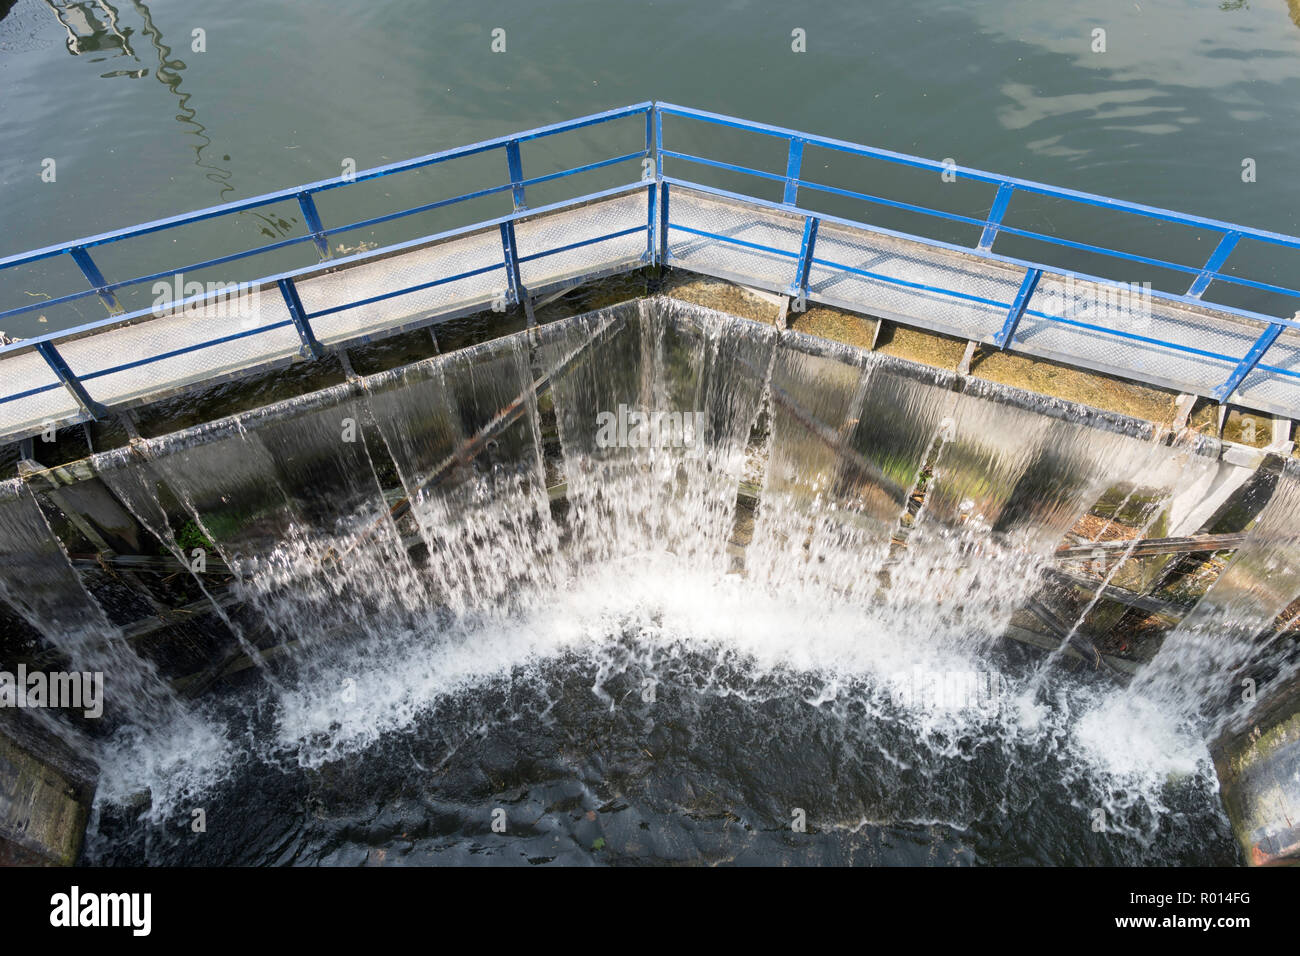 Water cascading over the canal lock gates at Fontenoy sur Moselle, Meurthe-et-Moselle , France, Europe Stock Photo